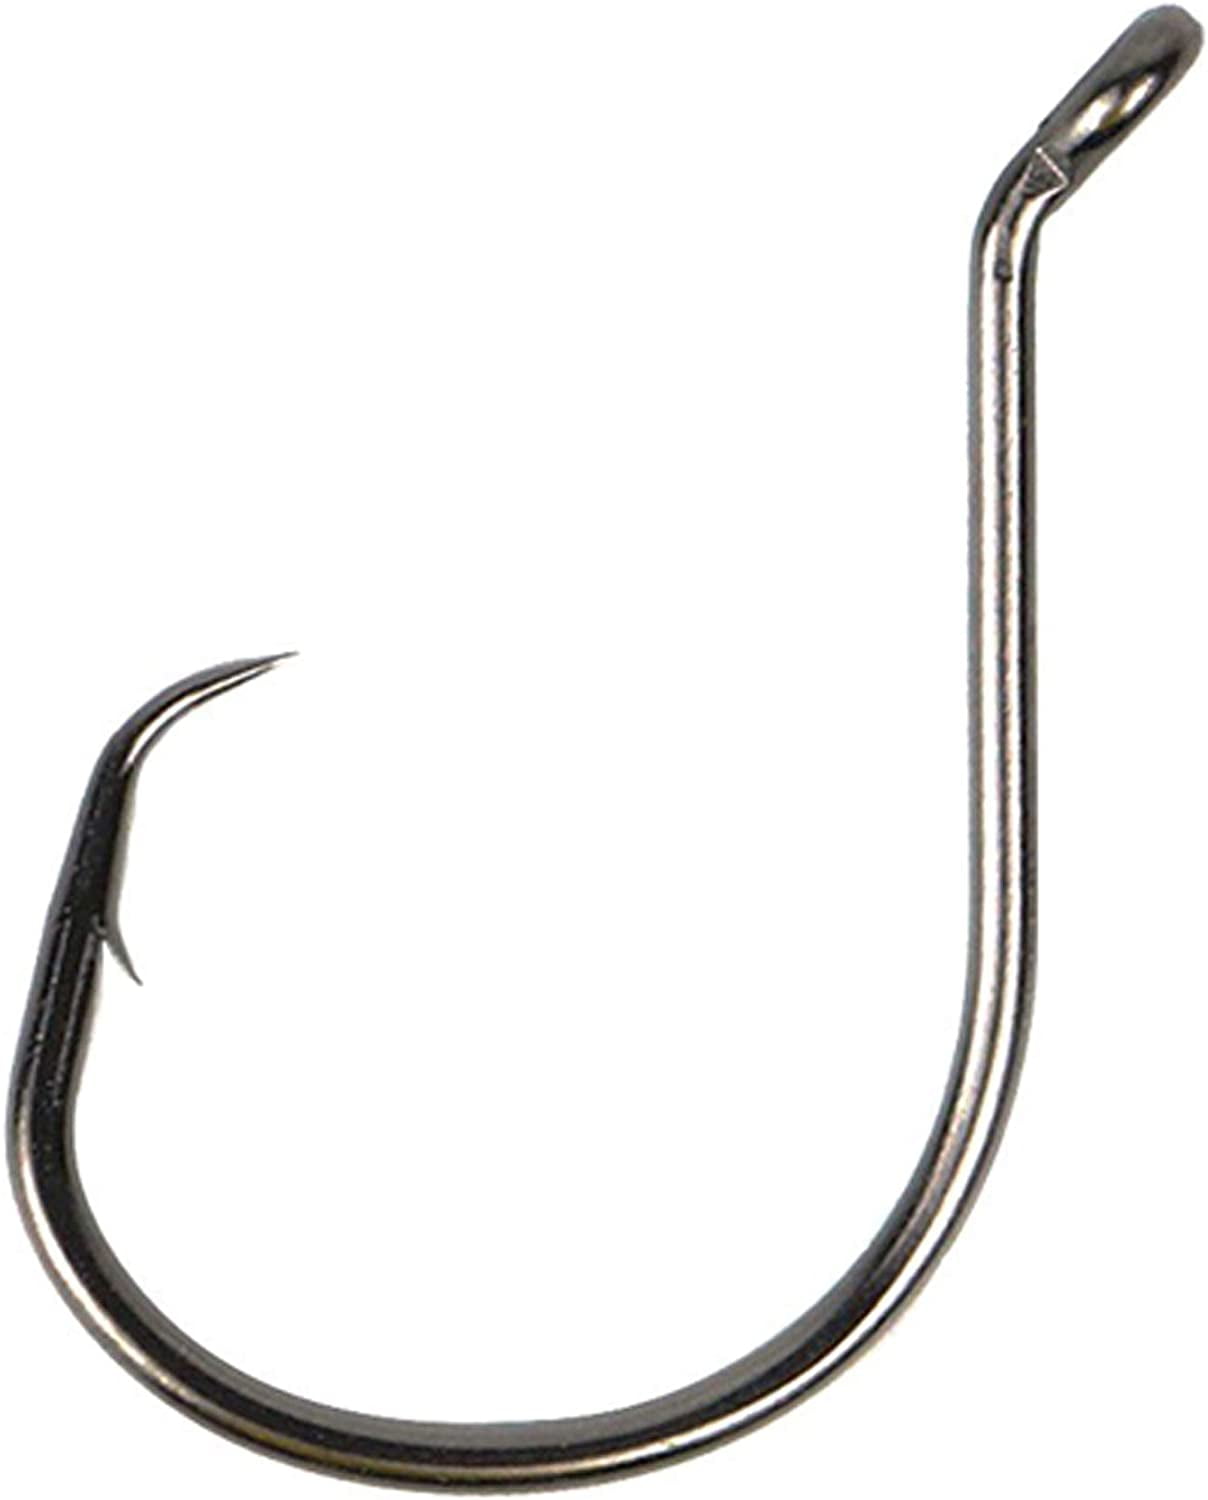 Stellar Circle Hooks 2/0 (25 Pack) UltraPoint Wide Gap Offset Extra Fine  Wire Hook, for Catfish, Carp, Bluegill to Tuna, Saltwater or Freshwater Fishing  Hooks